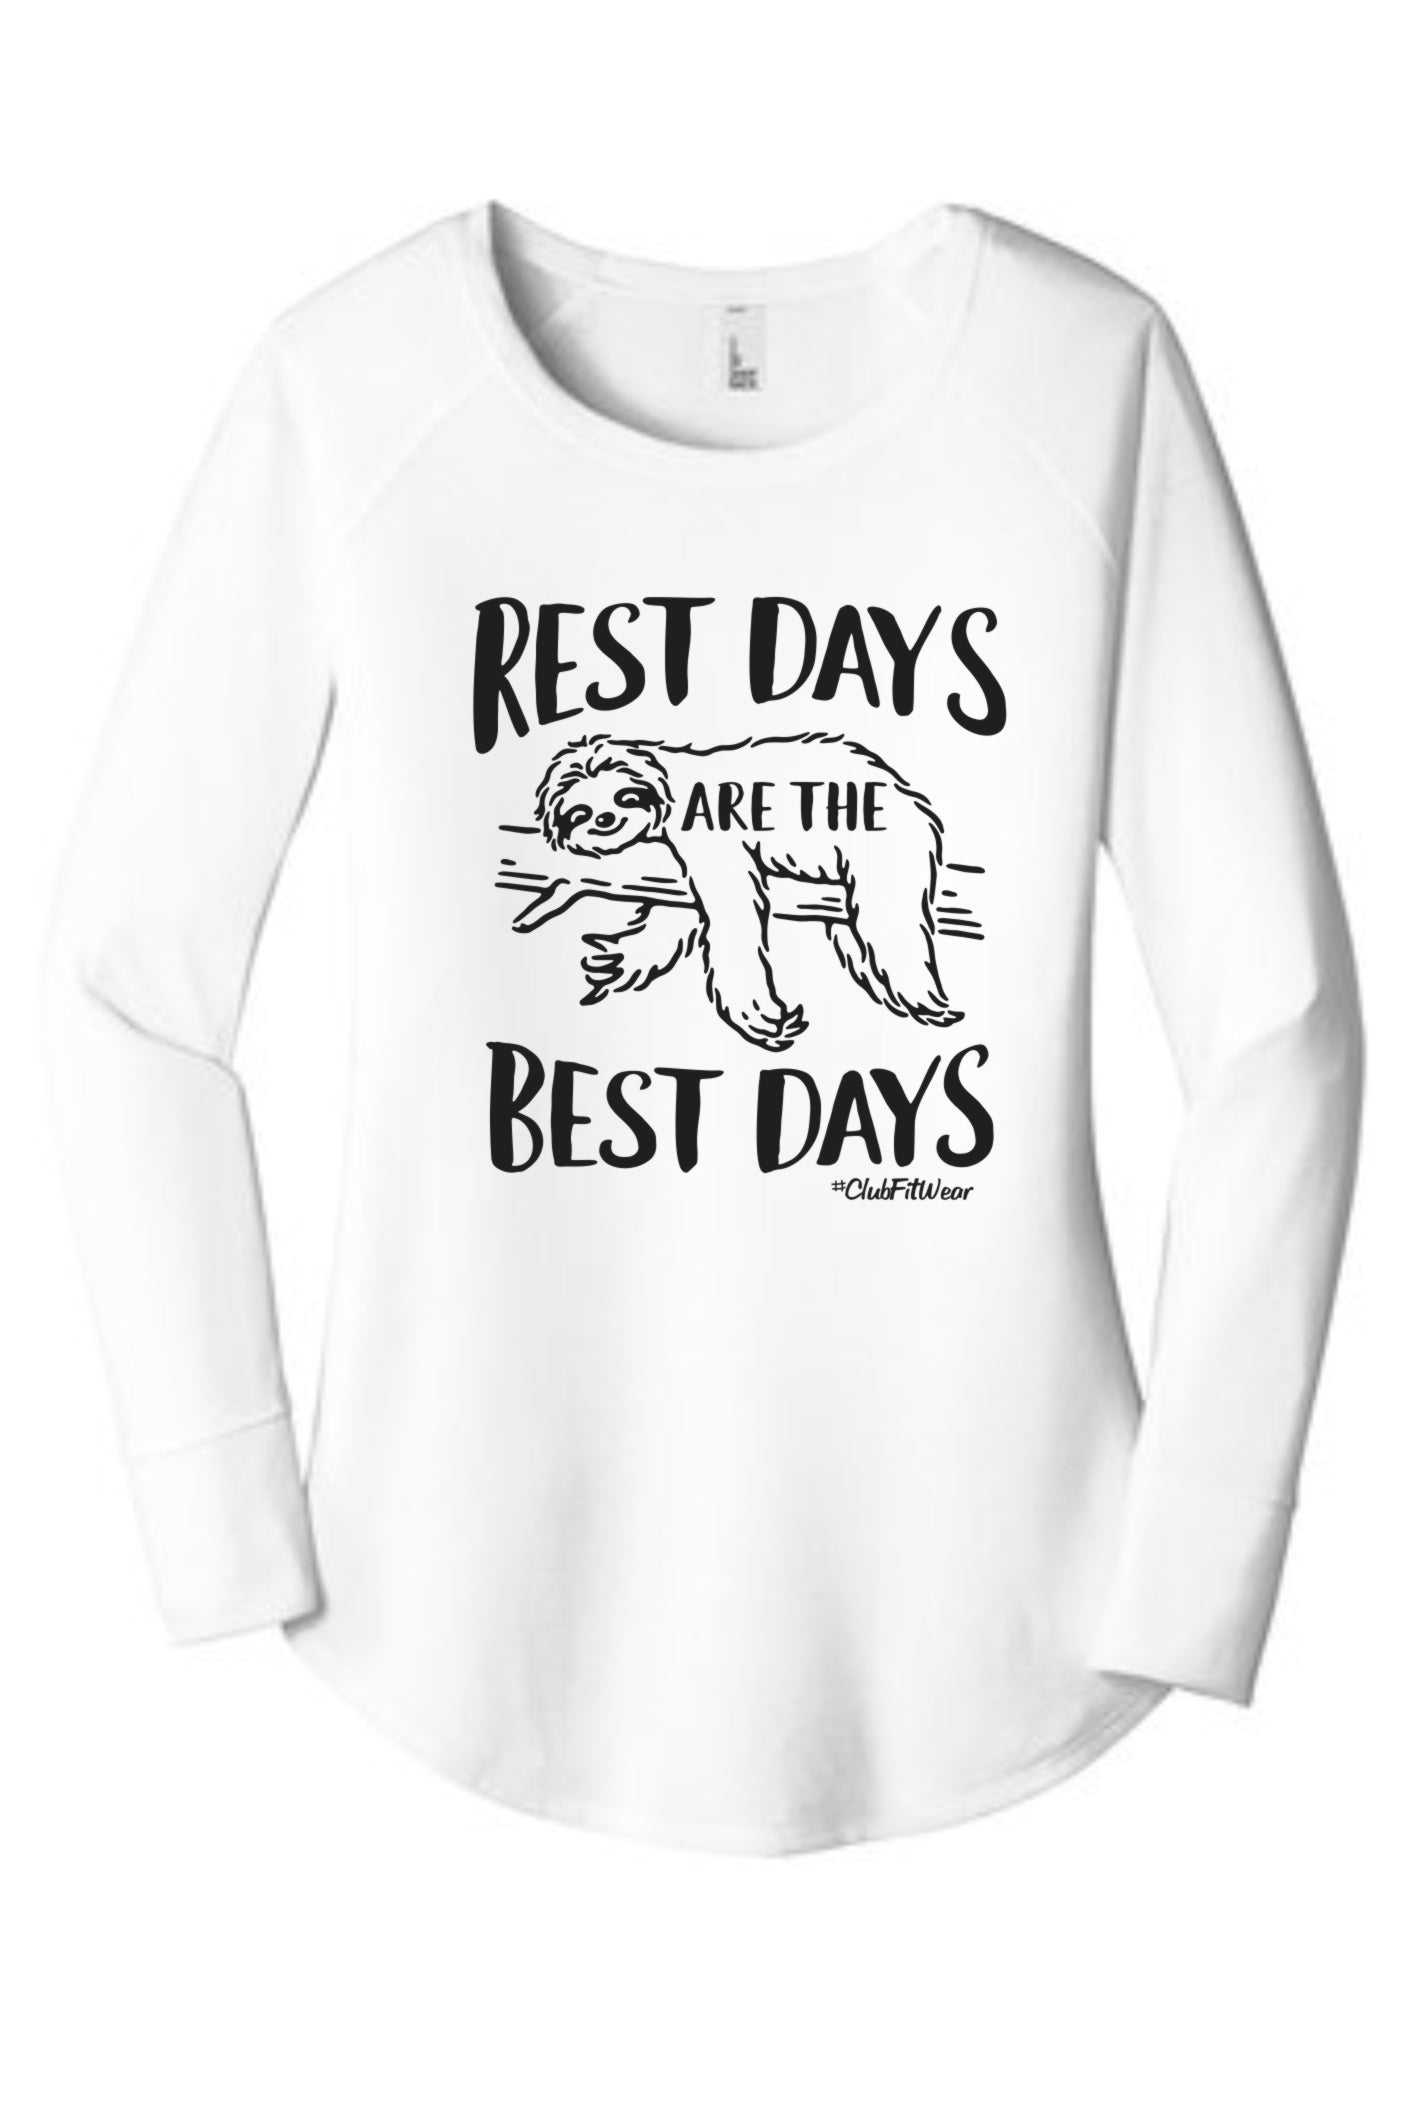 Rest Day are the Best Days - Long Sleeve Tunic